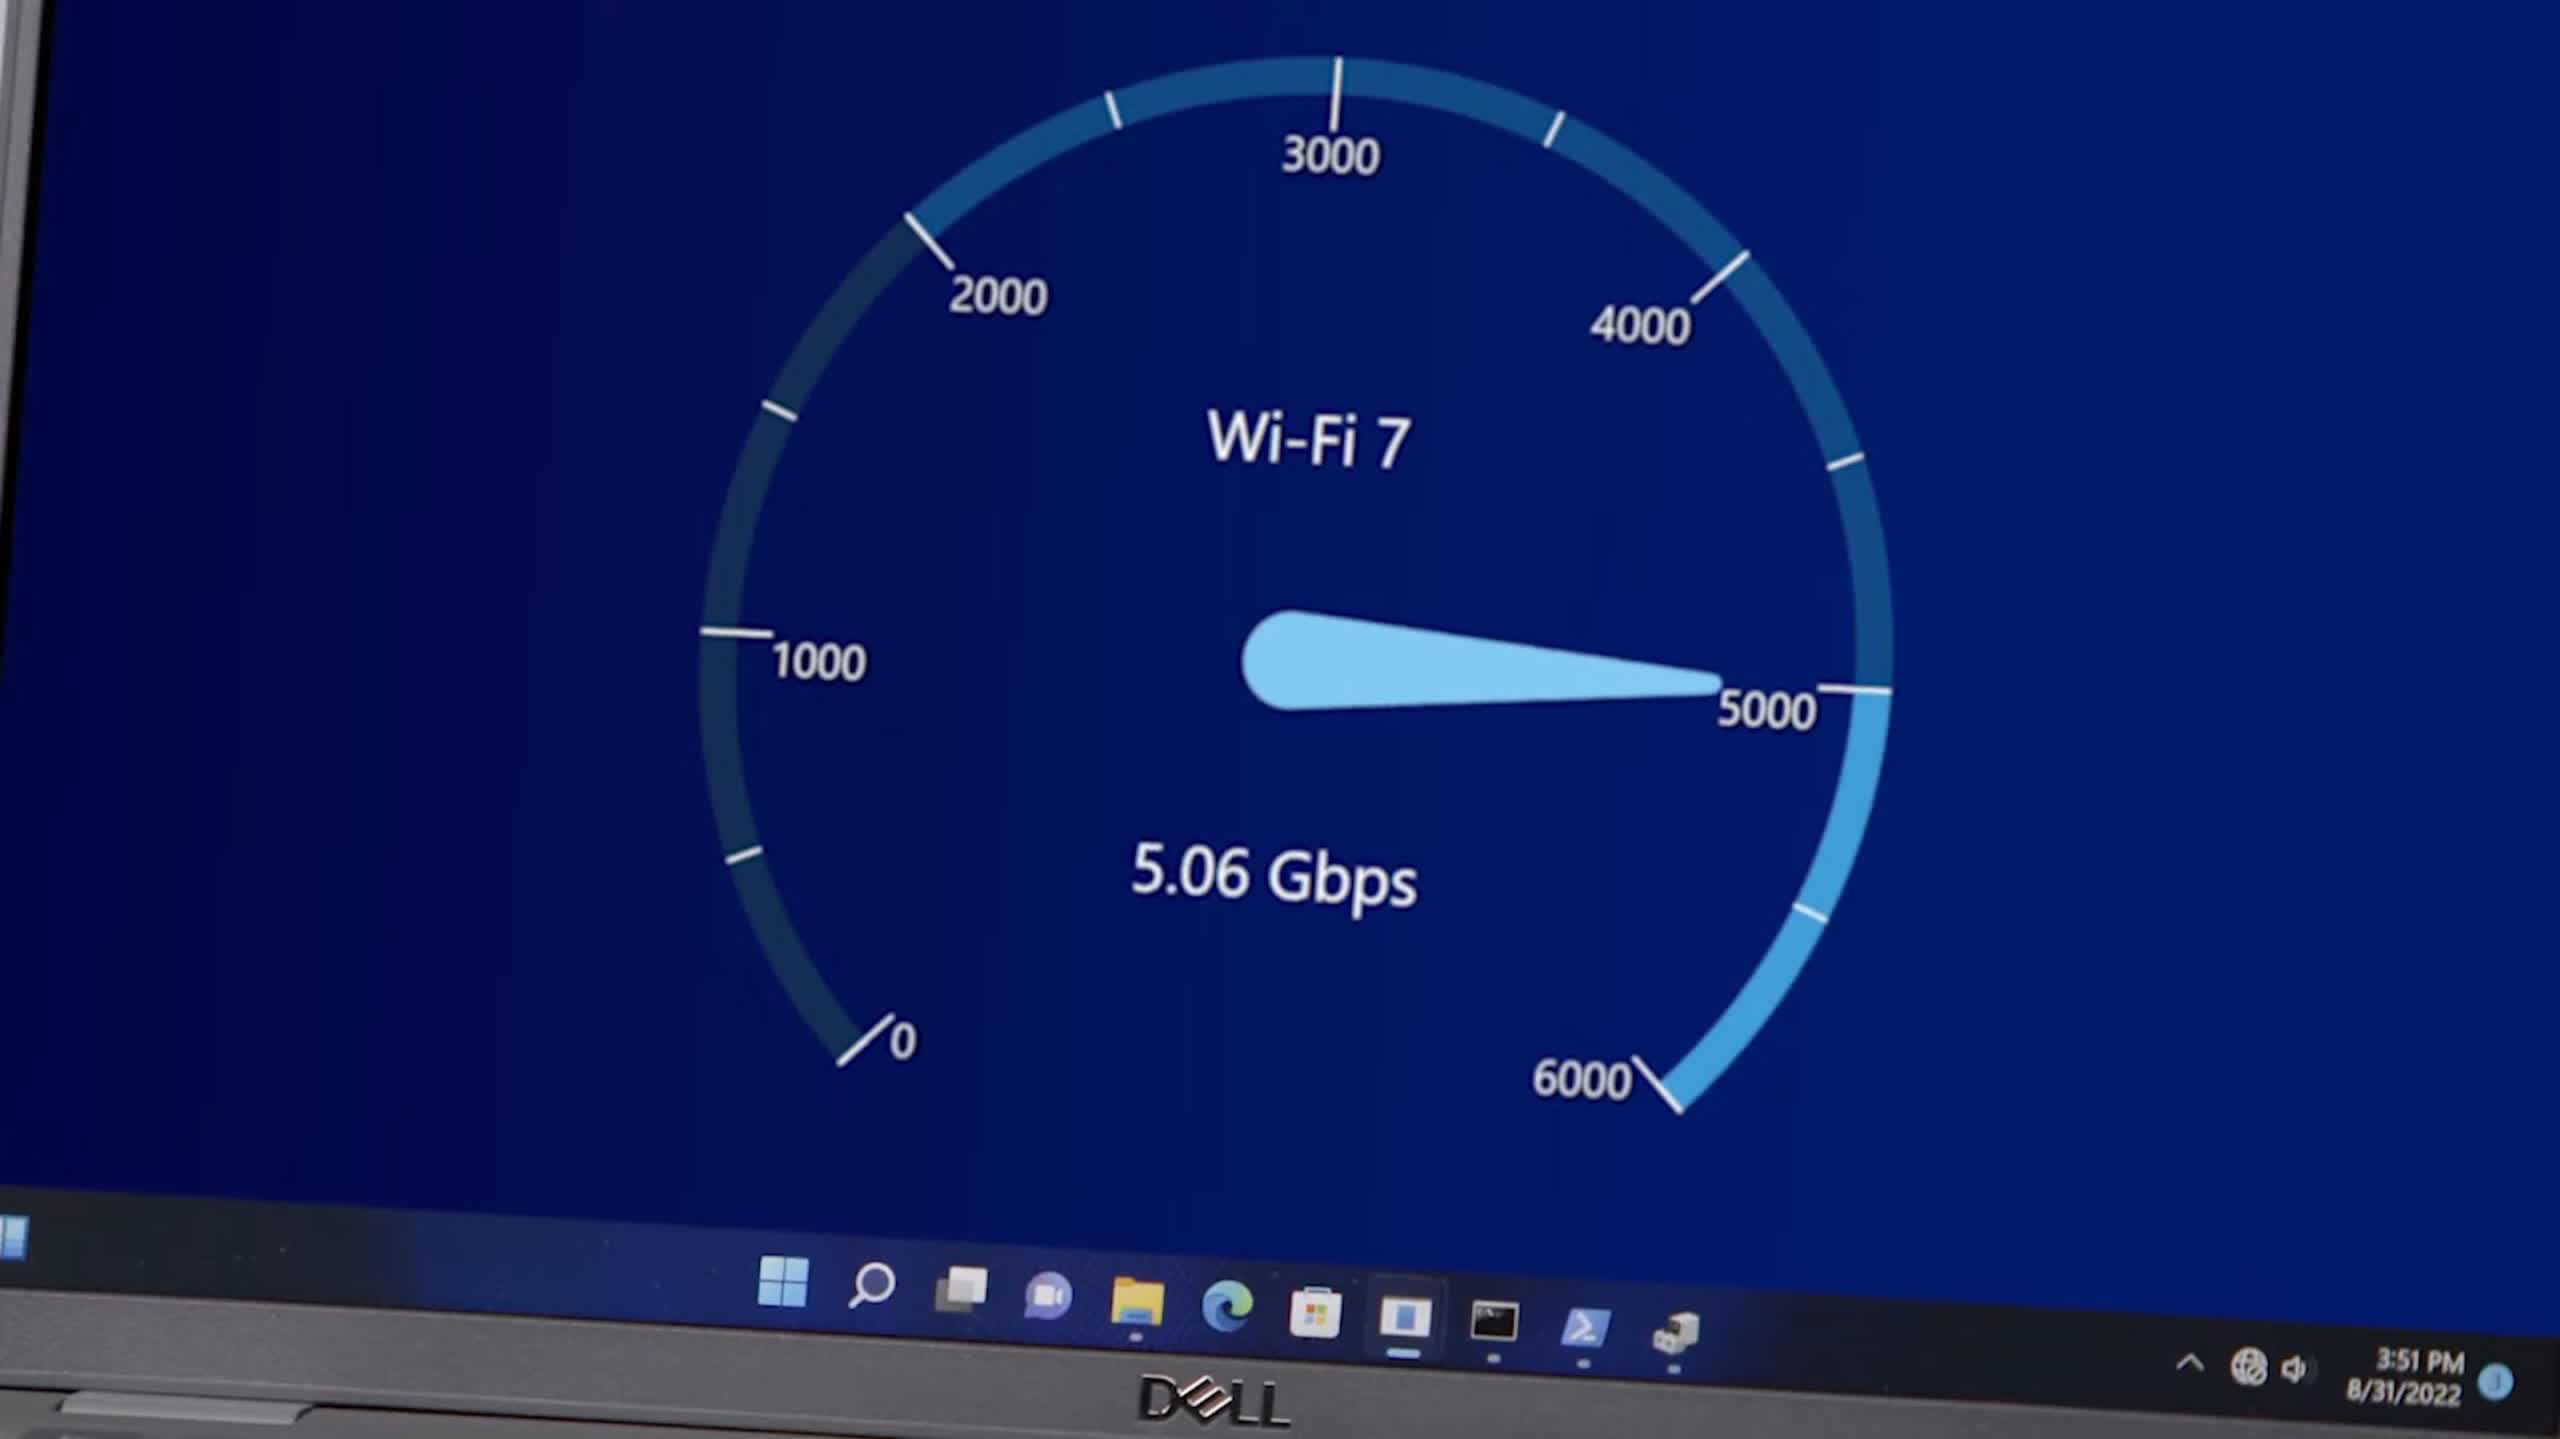 Intel and Broadcom show off Wi-Fi 7 reaching 5Gbps